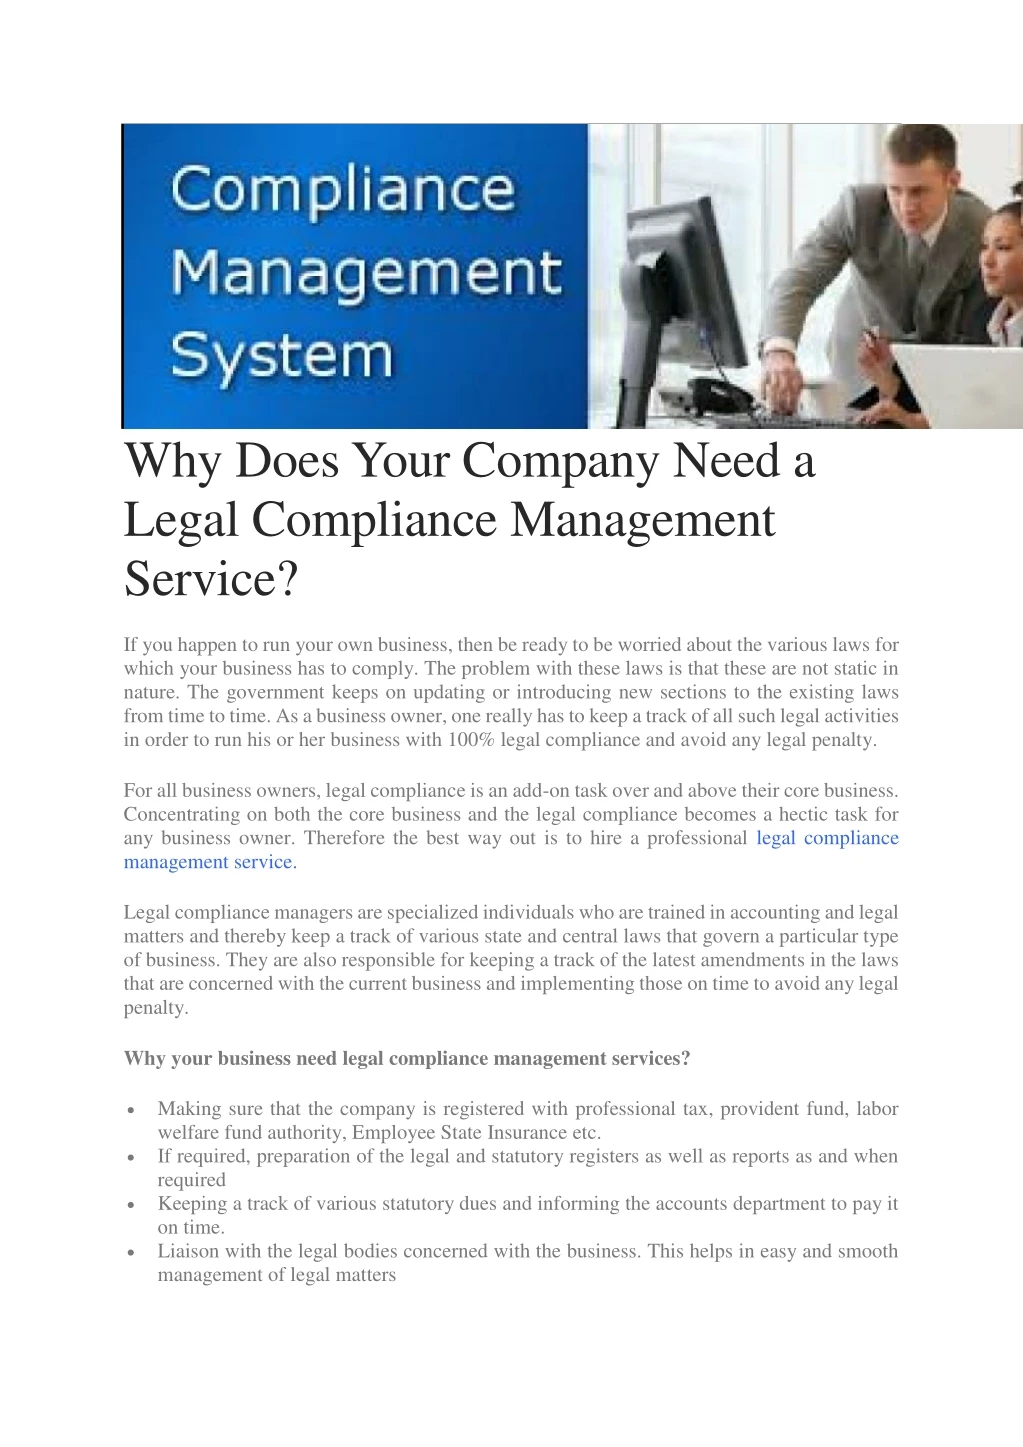 why does your company need a legal compliance